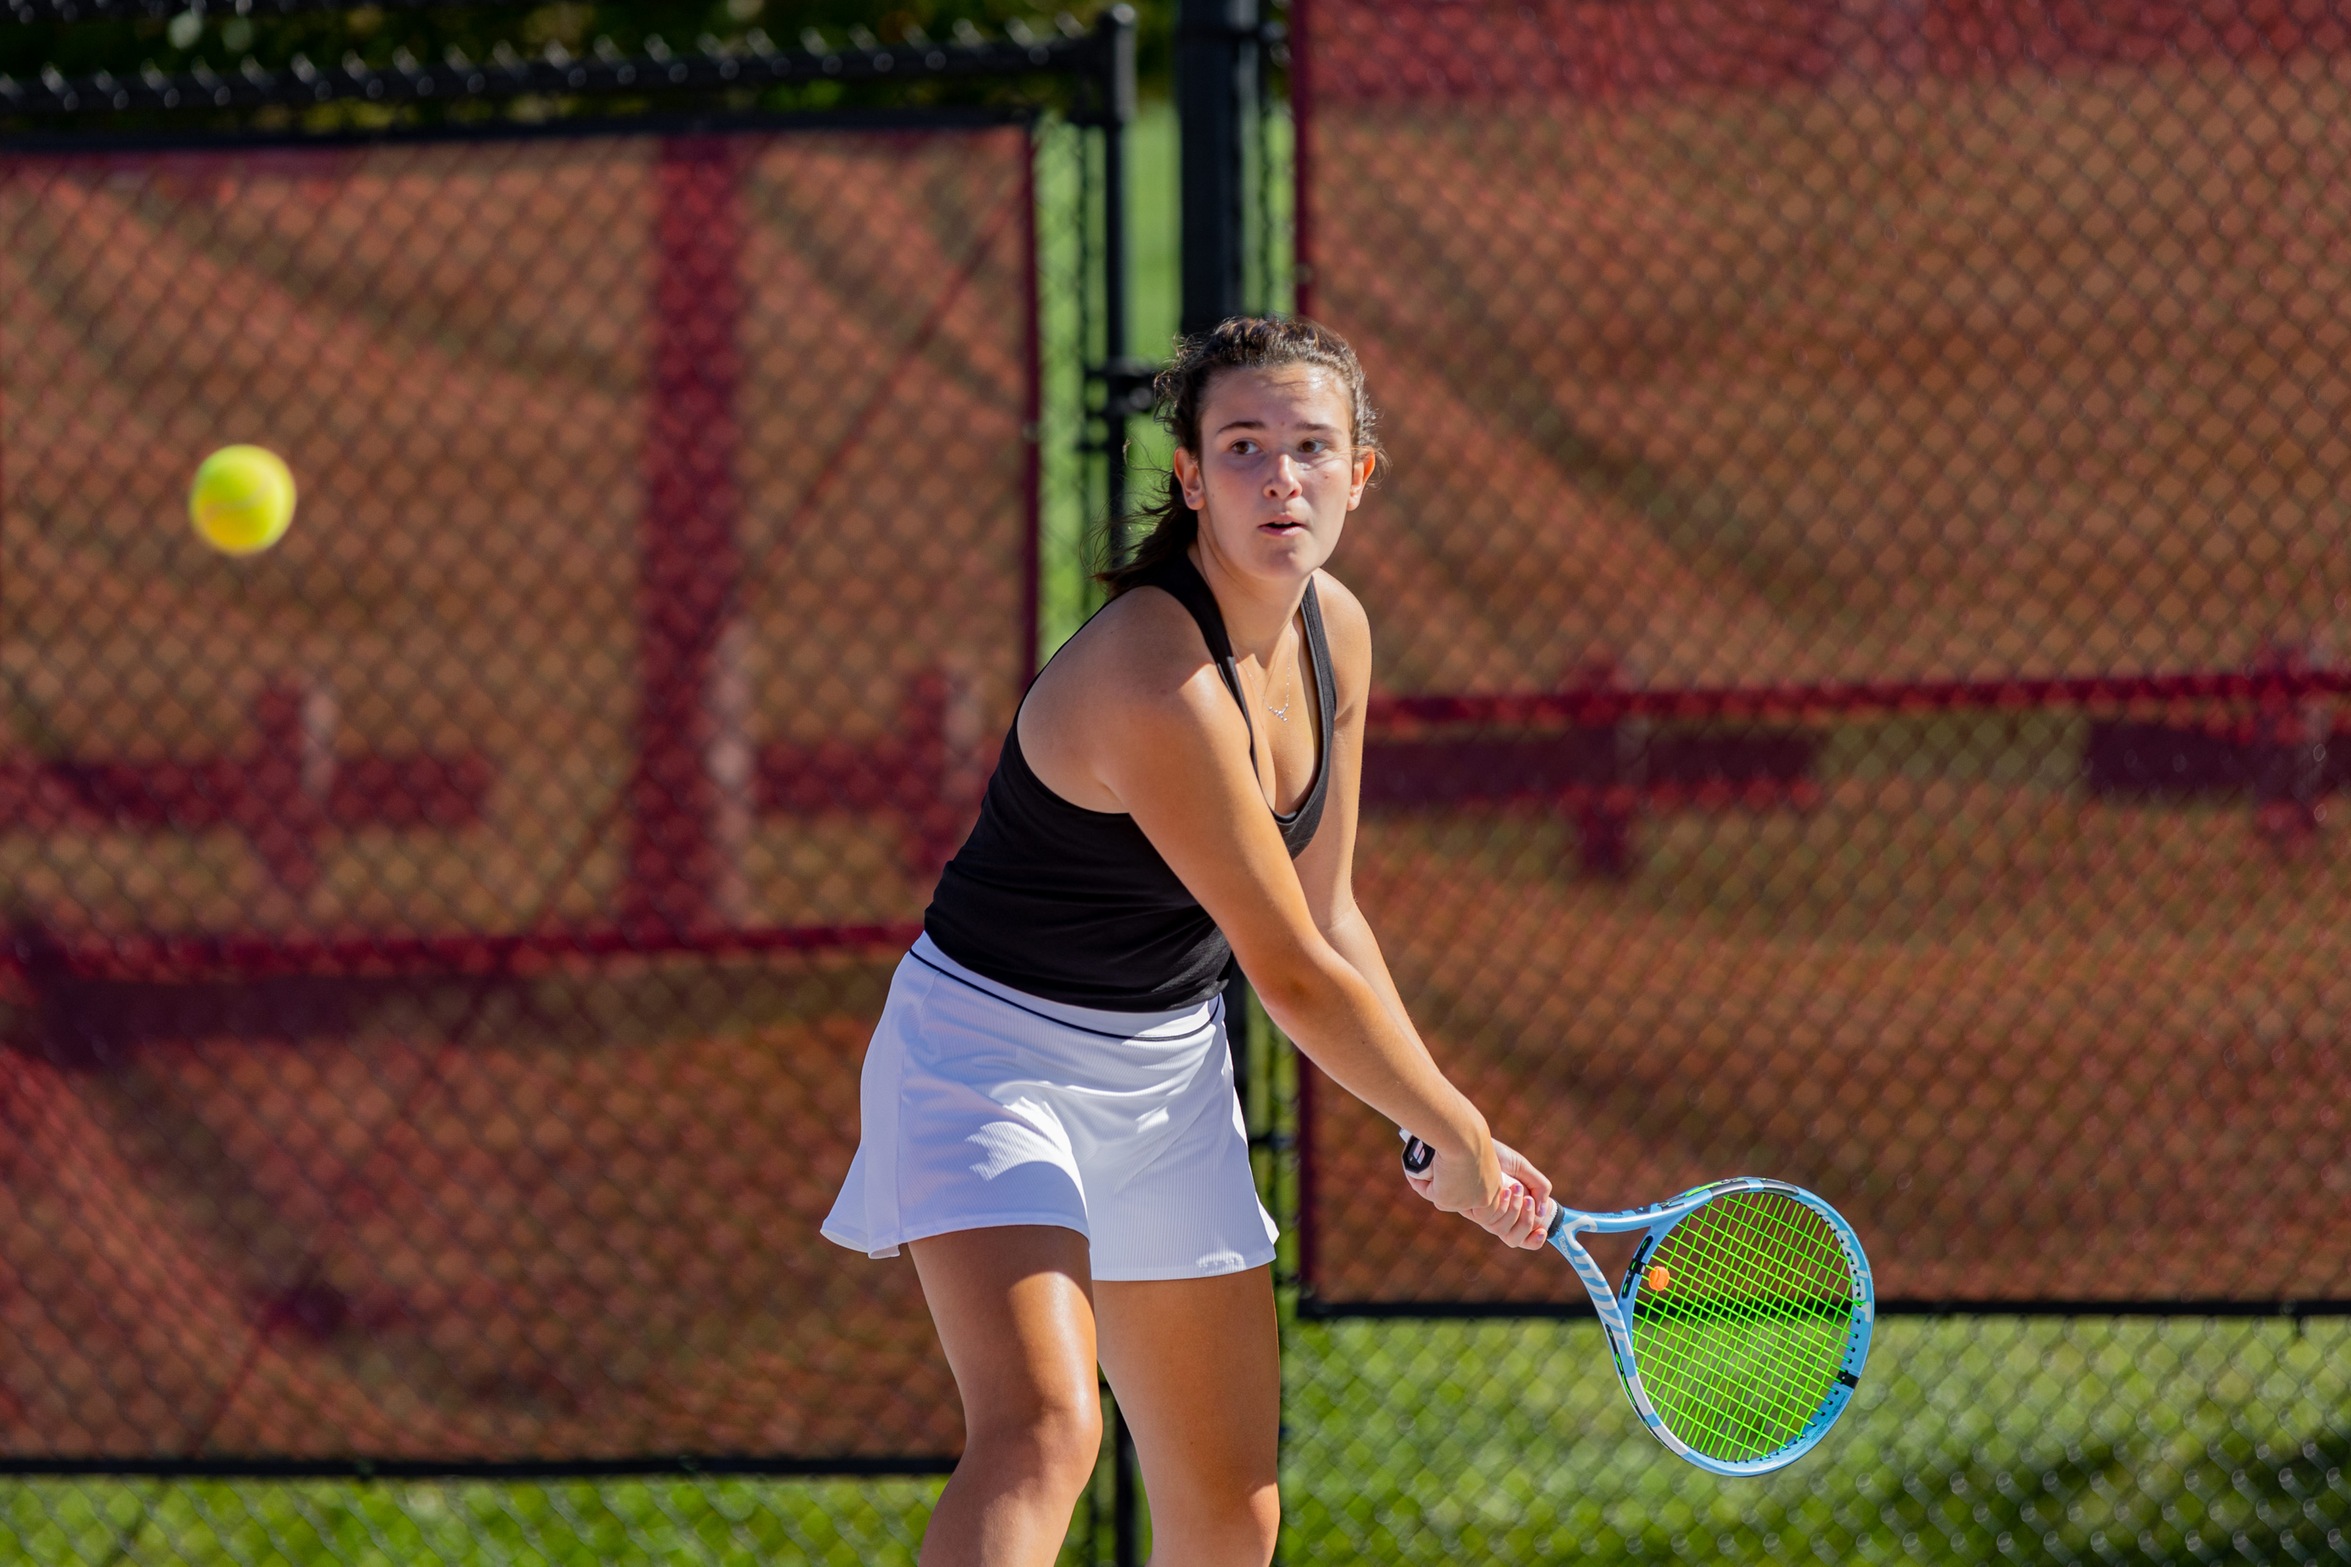 action photo of Rc women's tennis player hitting a backhand